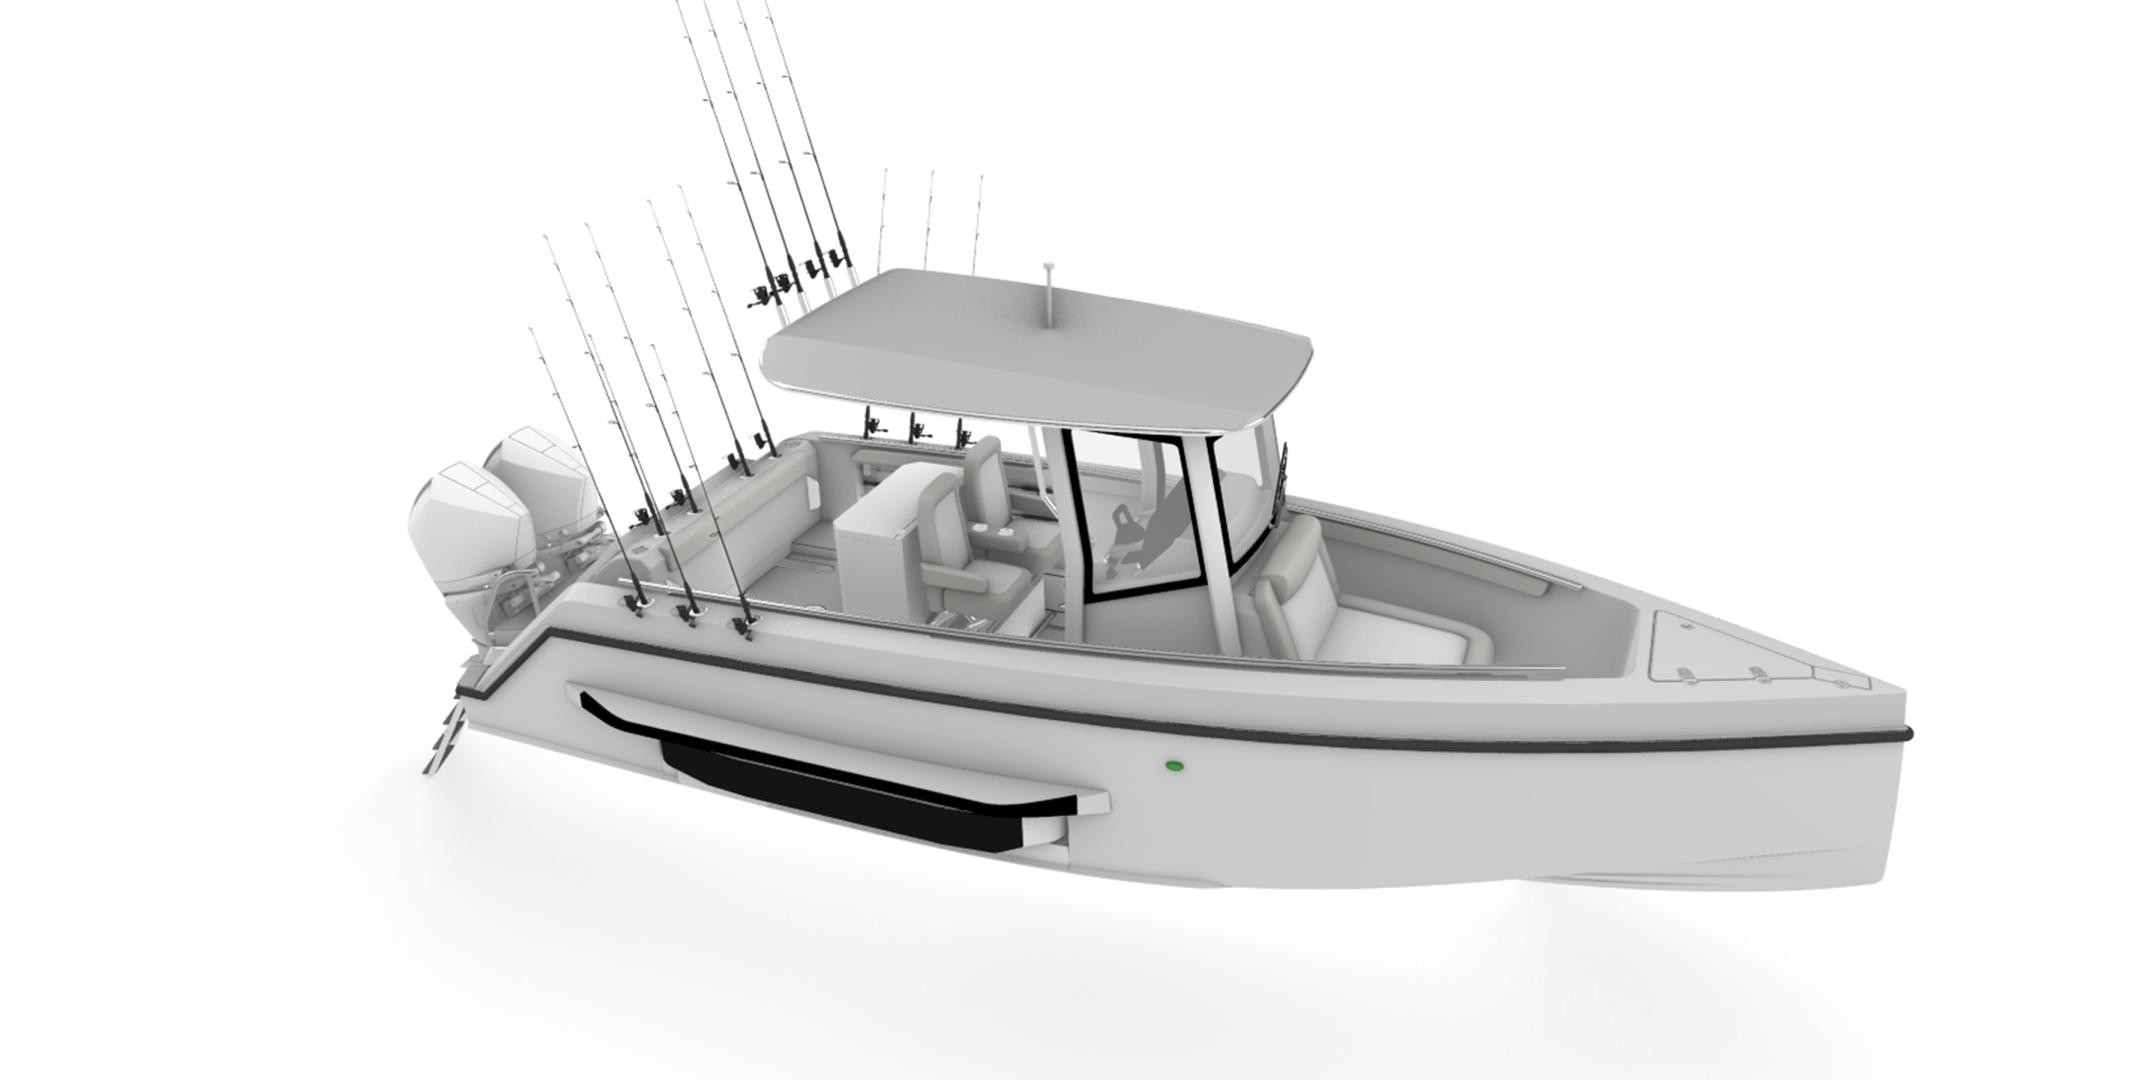 Iguana Yachts, X-Fisher: The First Amphibious Boat For Fishing